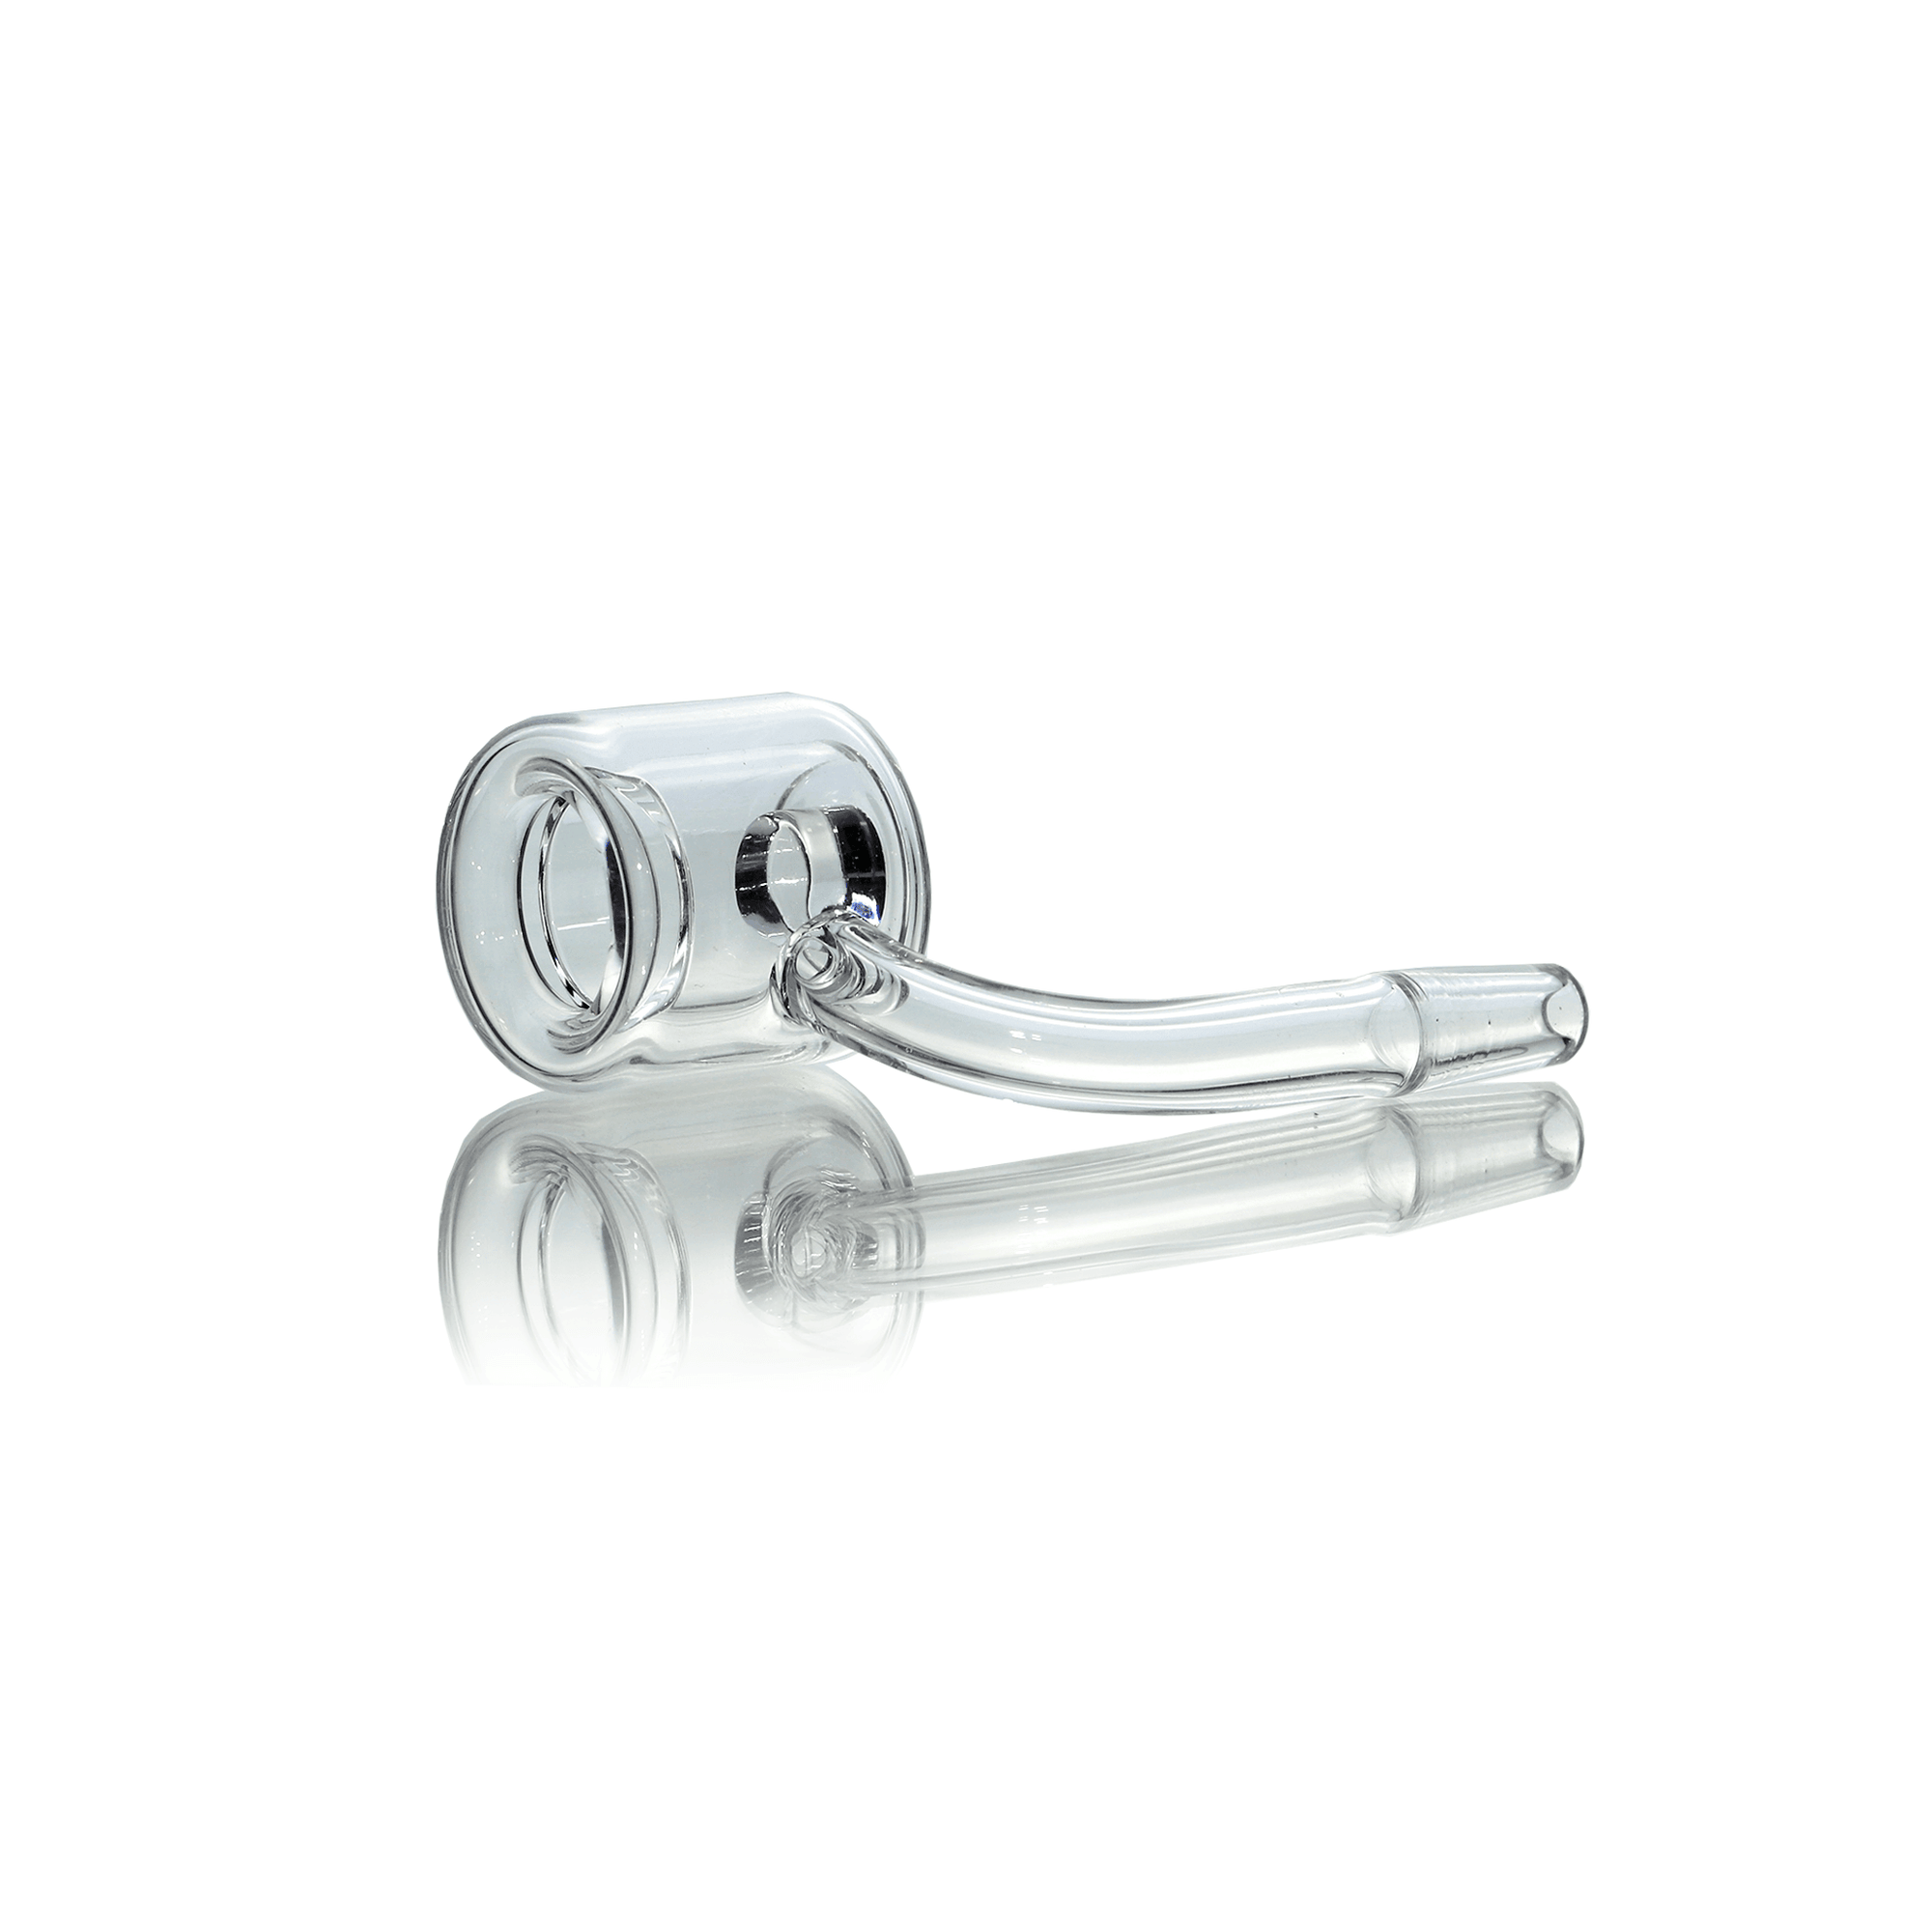 Quartz Banger Thermal Core Reactor 10mm Male With Saucer Cap | the dabbing specialists